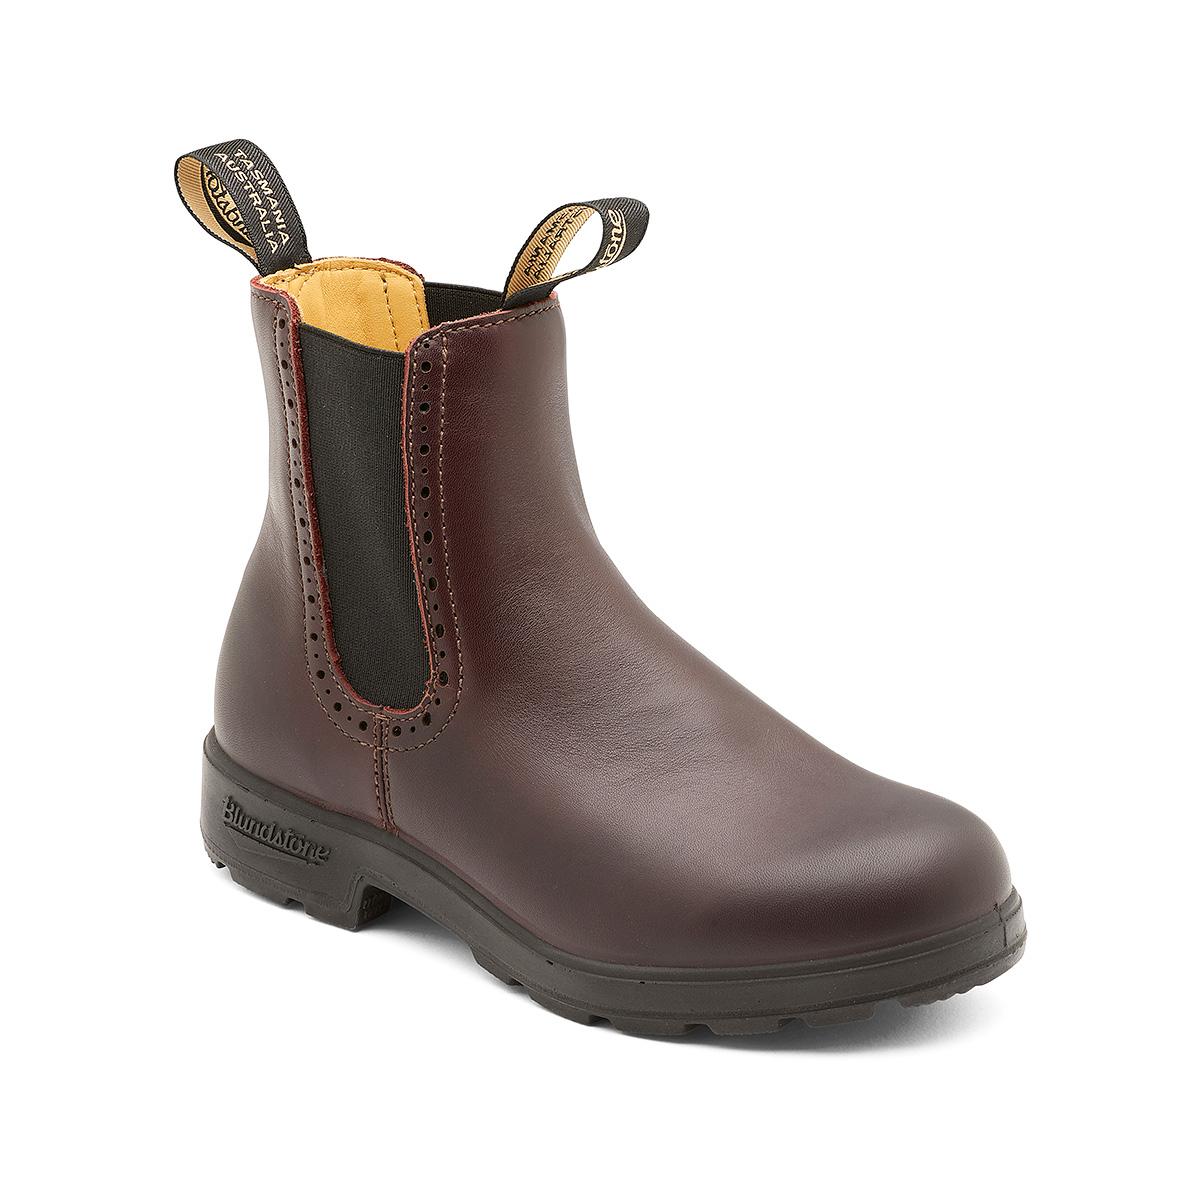 BLUNDSTONE | Women's 1352 High Top Boots